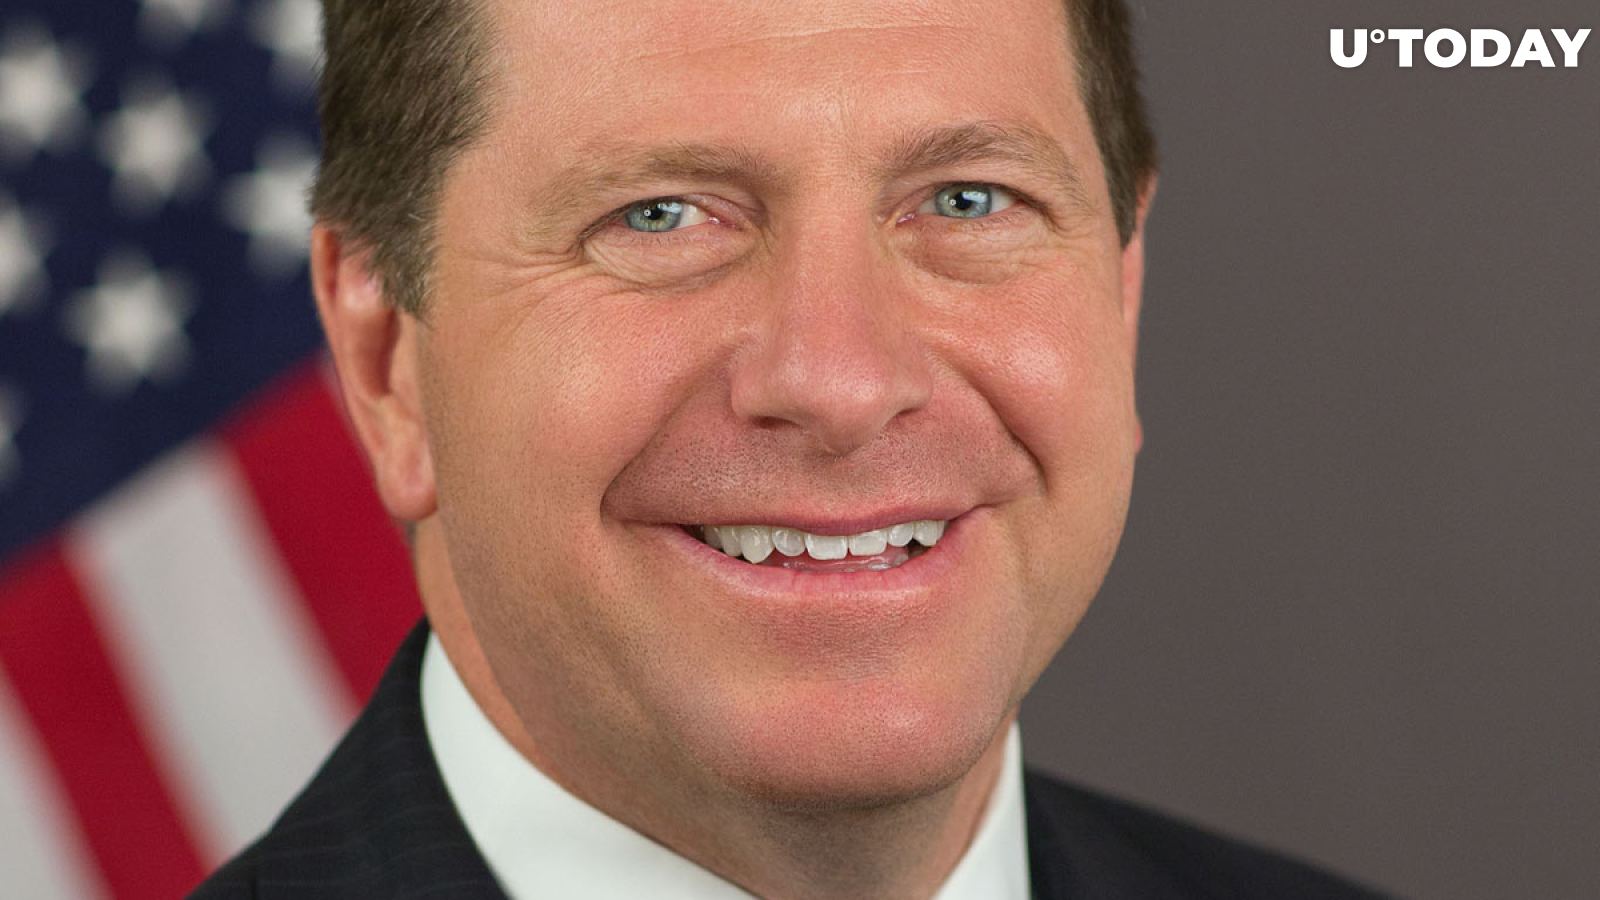 SEC Chair Jay Clayton Calls Bitcoin "Store of Value"